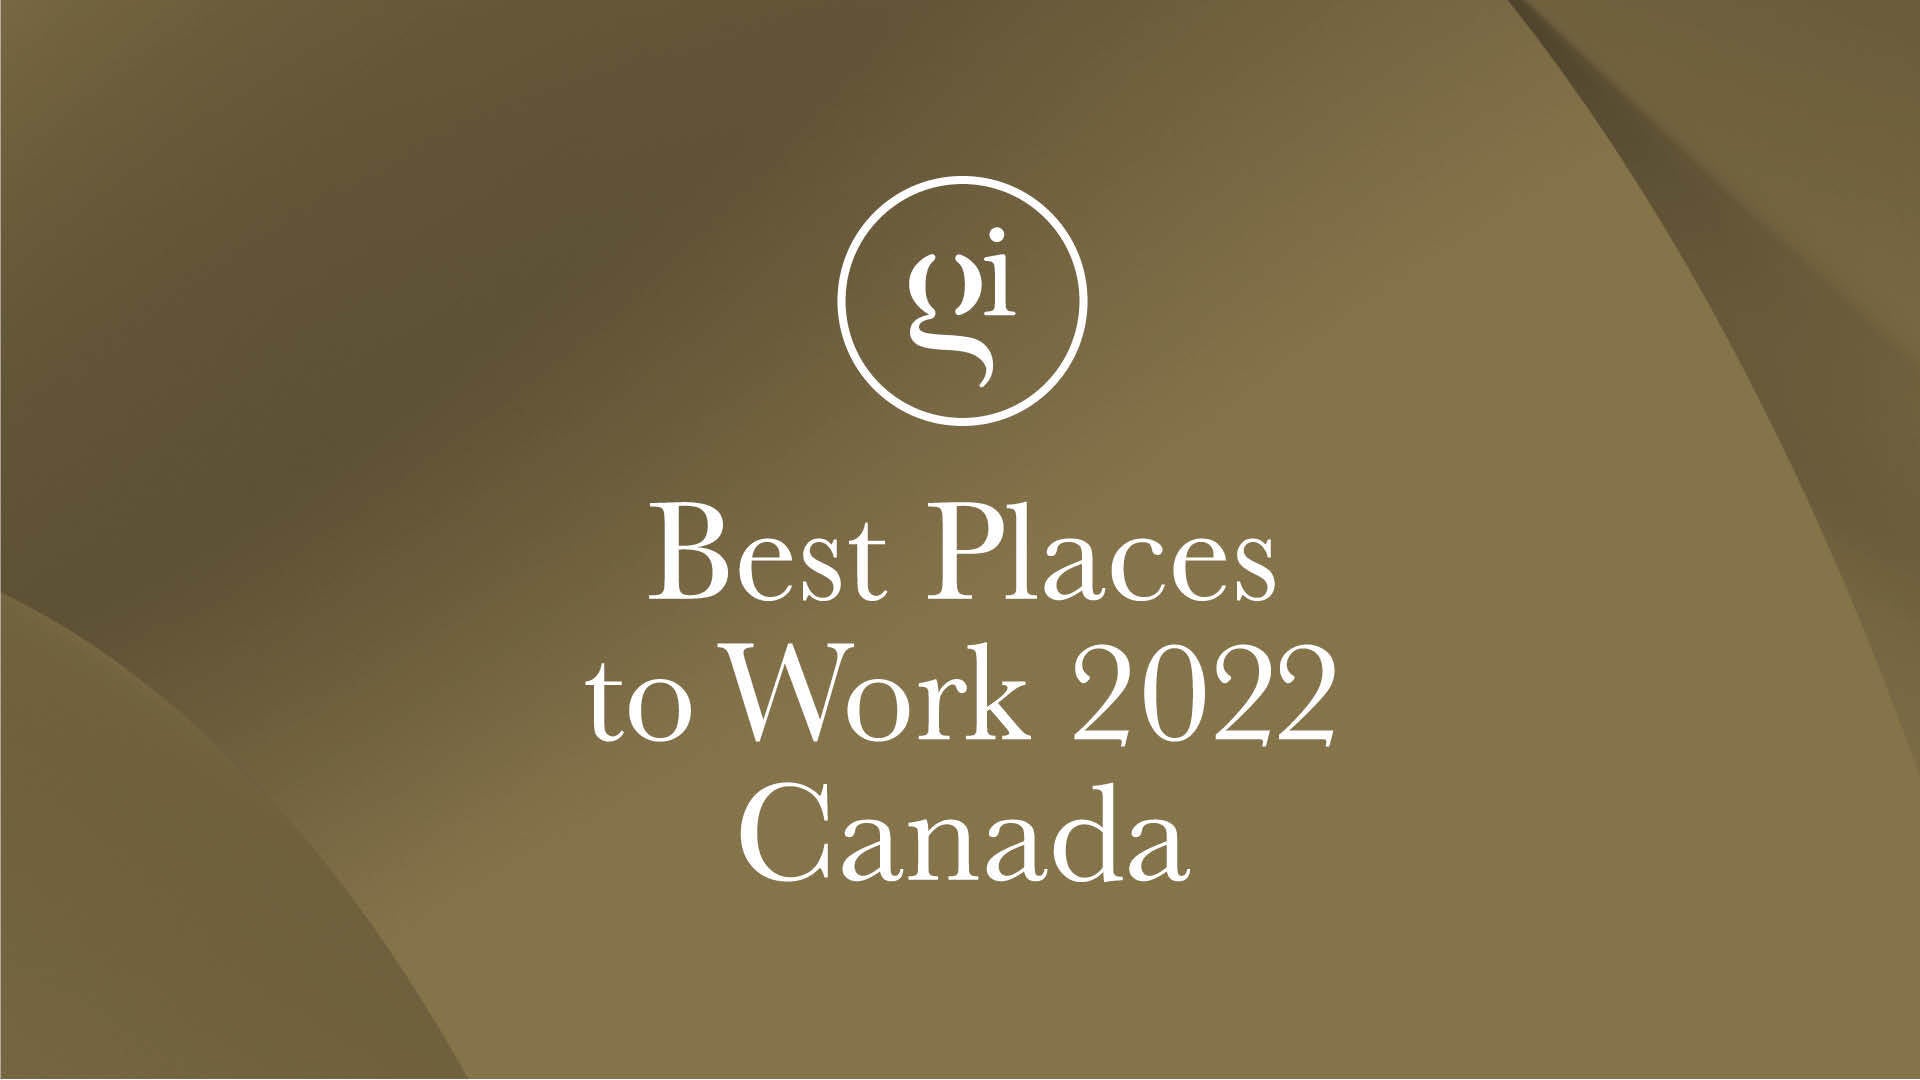 Image for GamesIndustry.biz Best Places To Work Awards Canada to be presented at MEGAMIGS